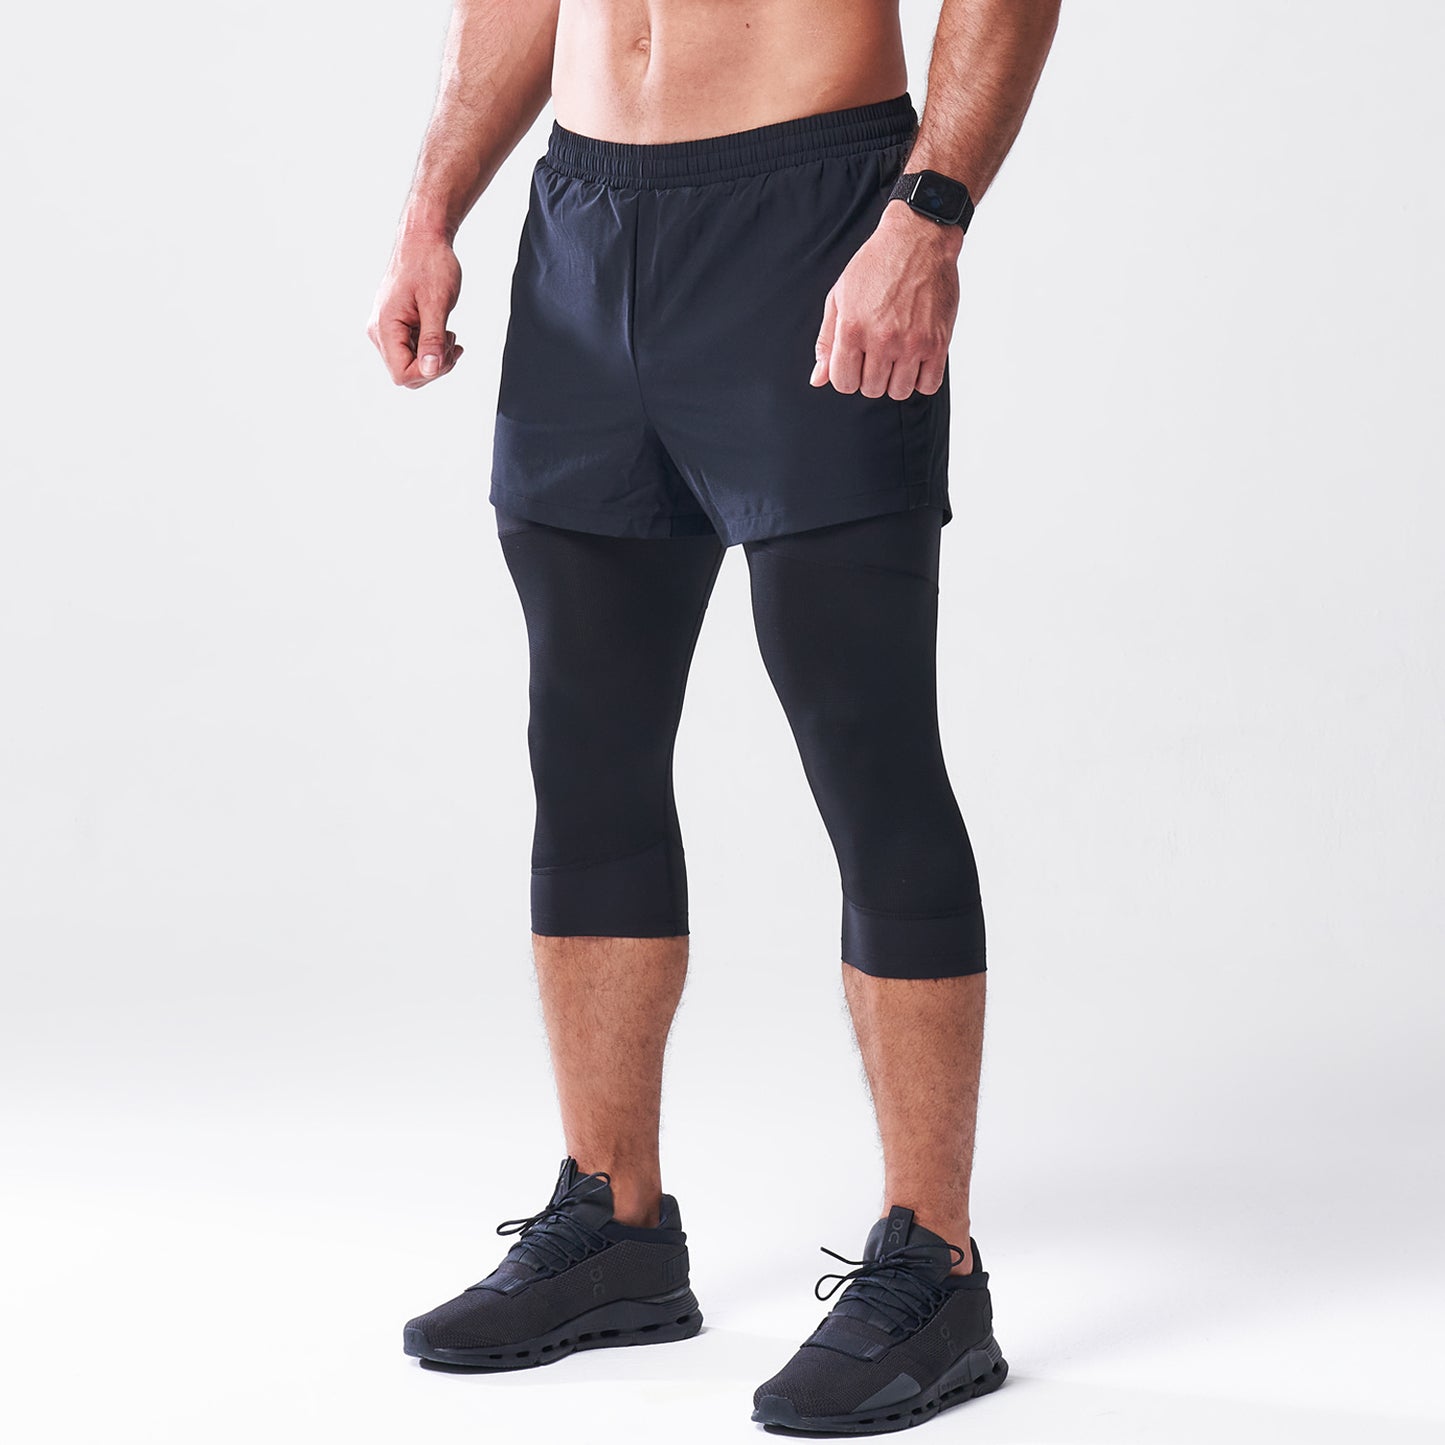 Can Men Wear Compression Tights at the Gym?